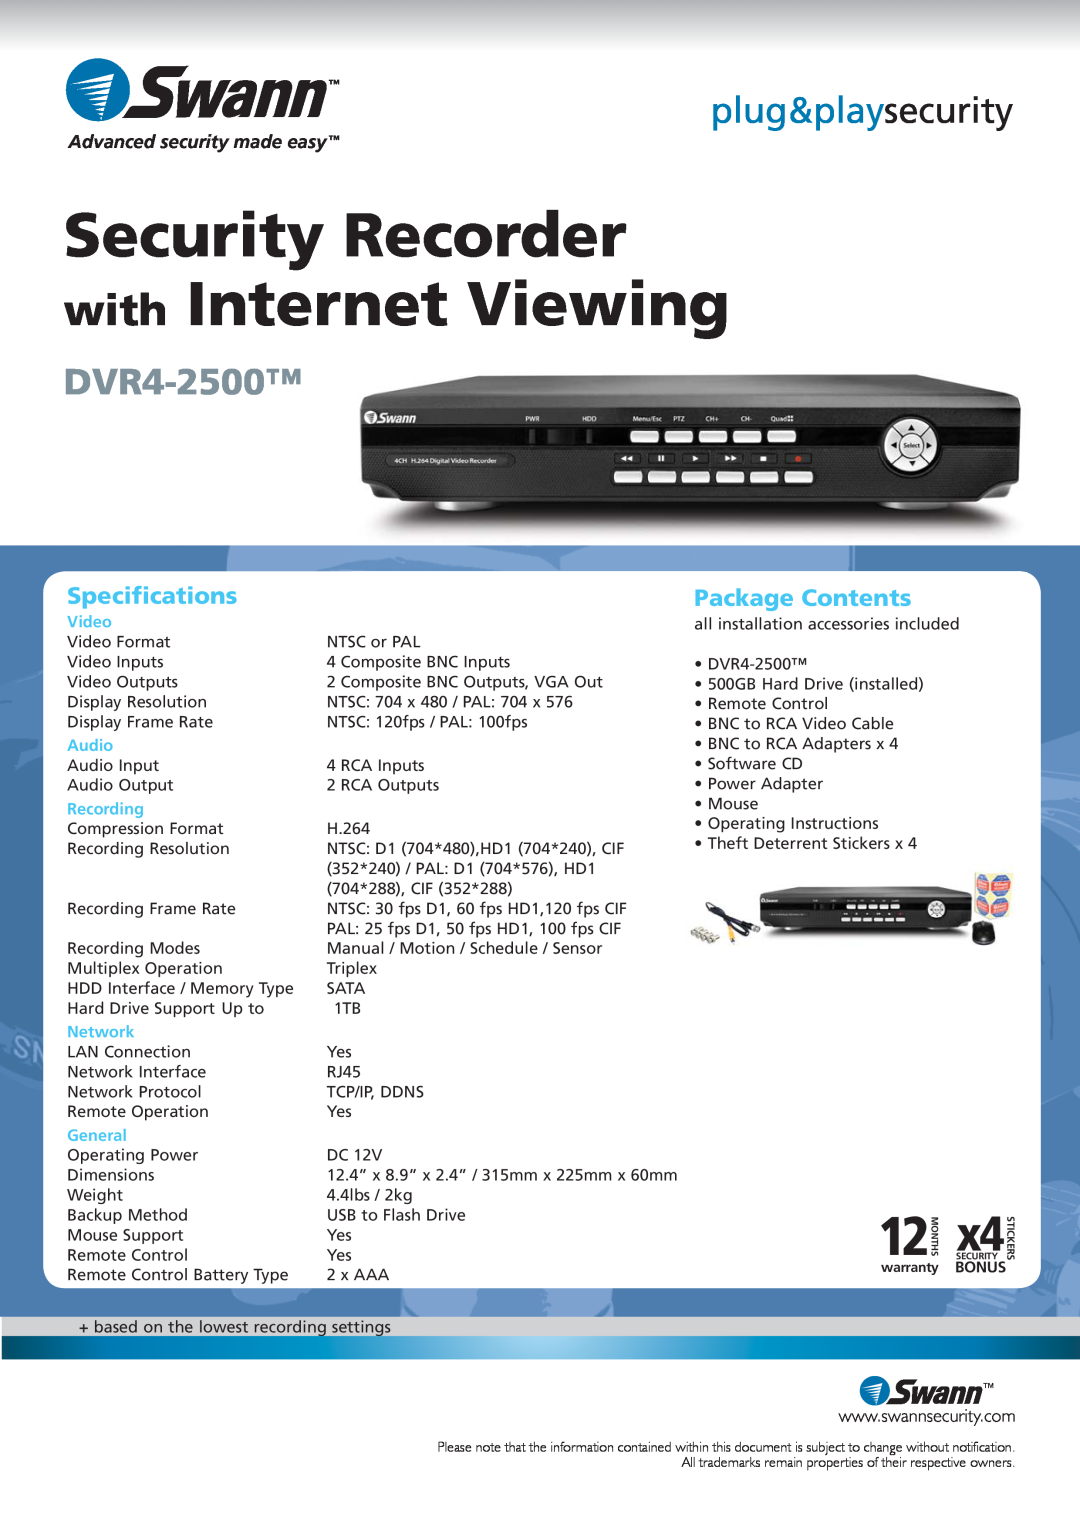 Swann SR342-2DV Security Recorder with Internet Viewing, plug&playsecurity, DVR4-2500, Speciﬁcations, Package Contents 